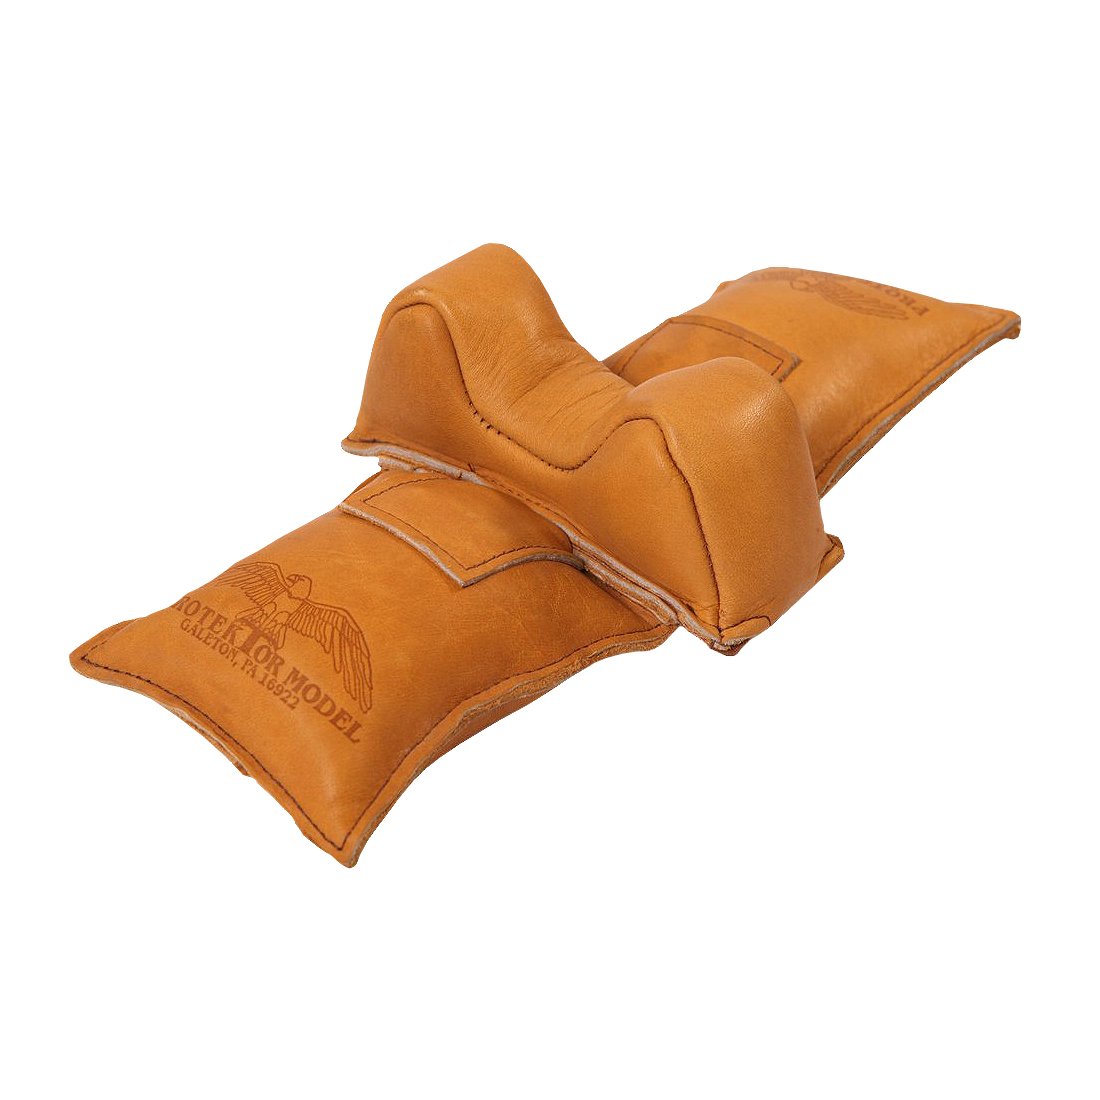 Protektor Model #4 Owl Ear Front Blind and Window Shooting Rest Bag Leather Tan Unfilled